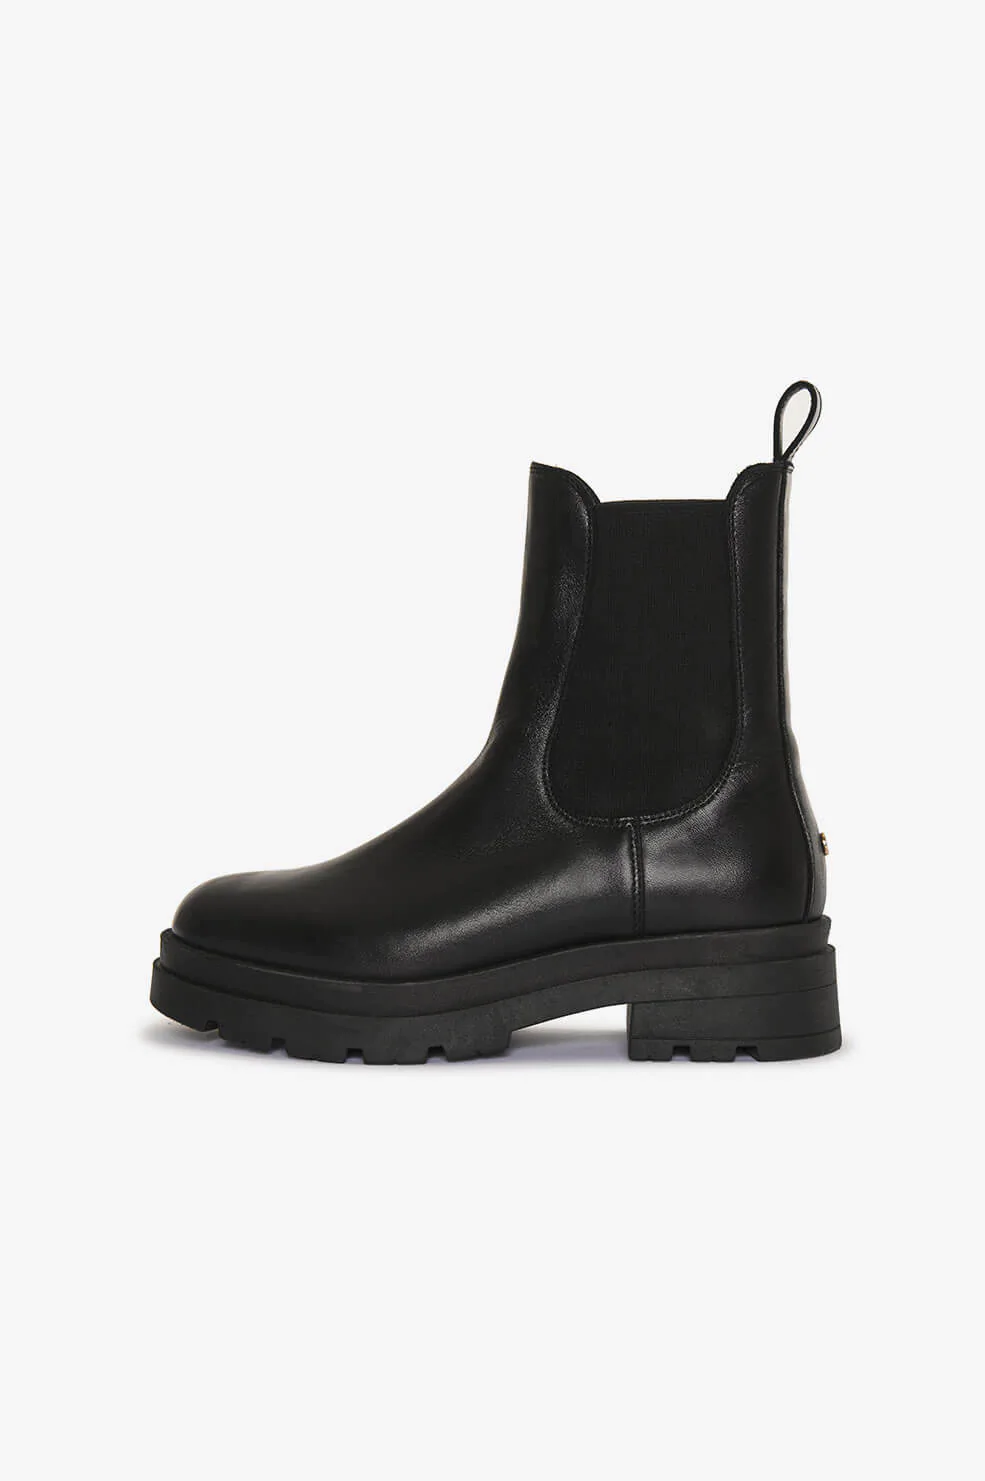 Anine Bing - Justine Boots in Black